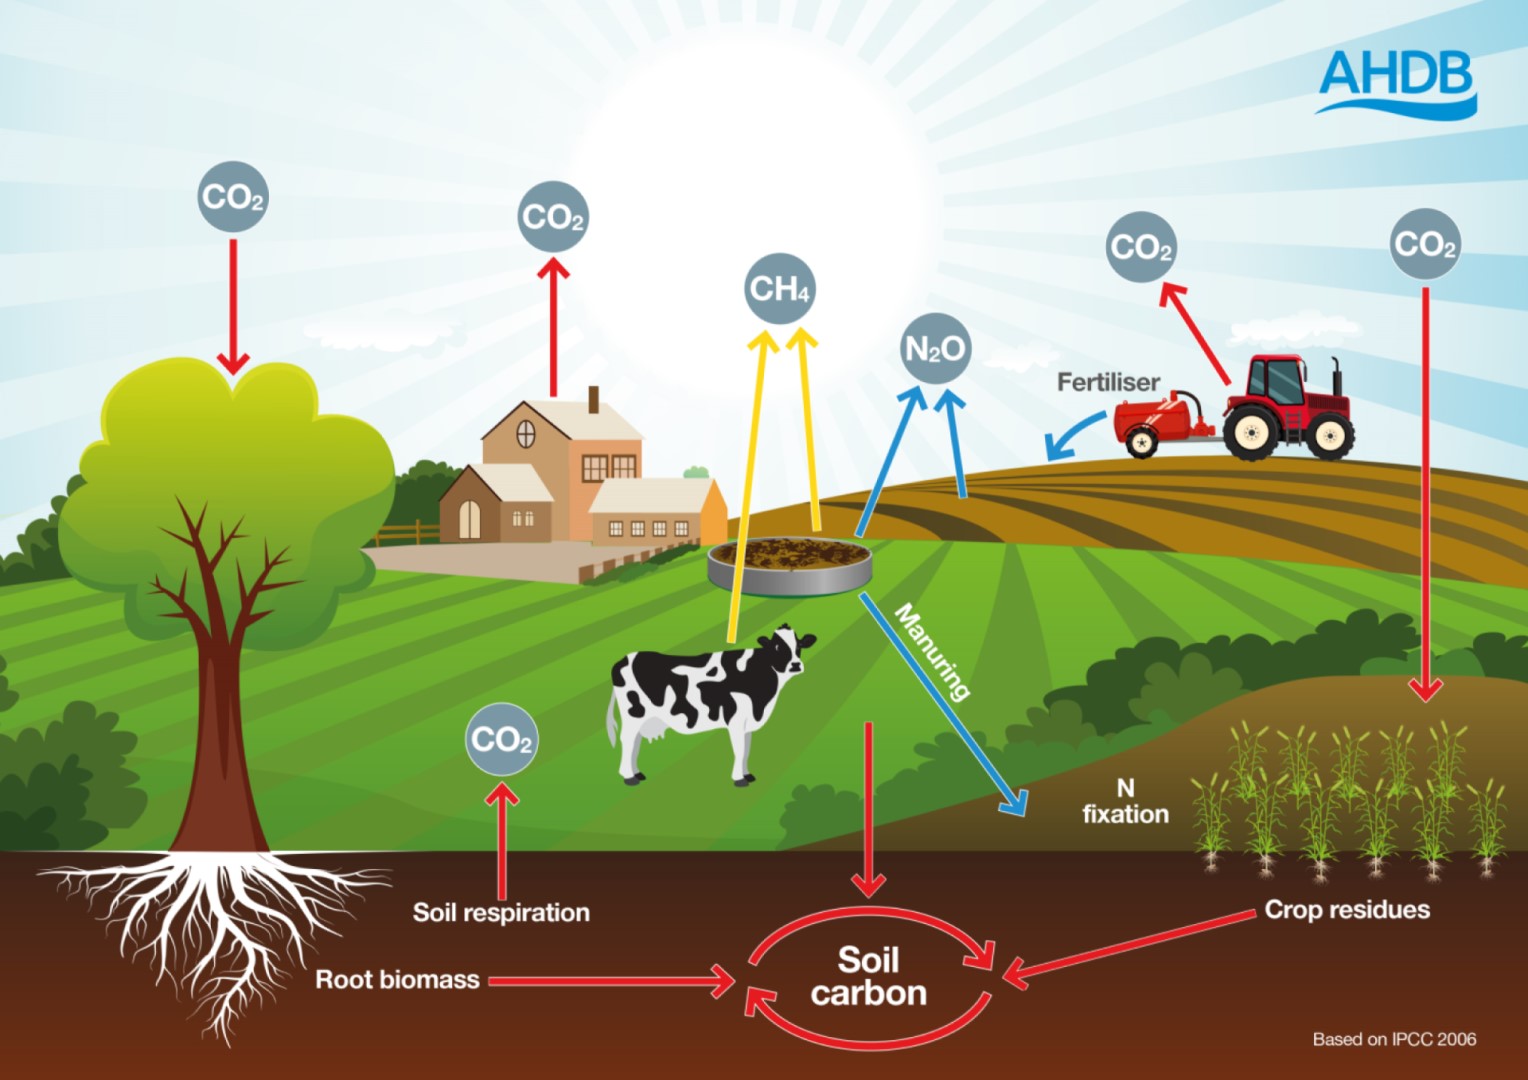 Illustration of the sources and sinks of greenhouse gases in agriculture